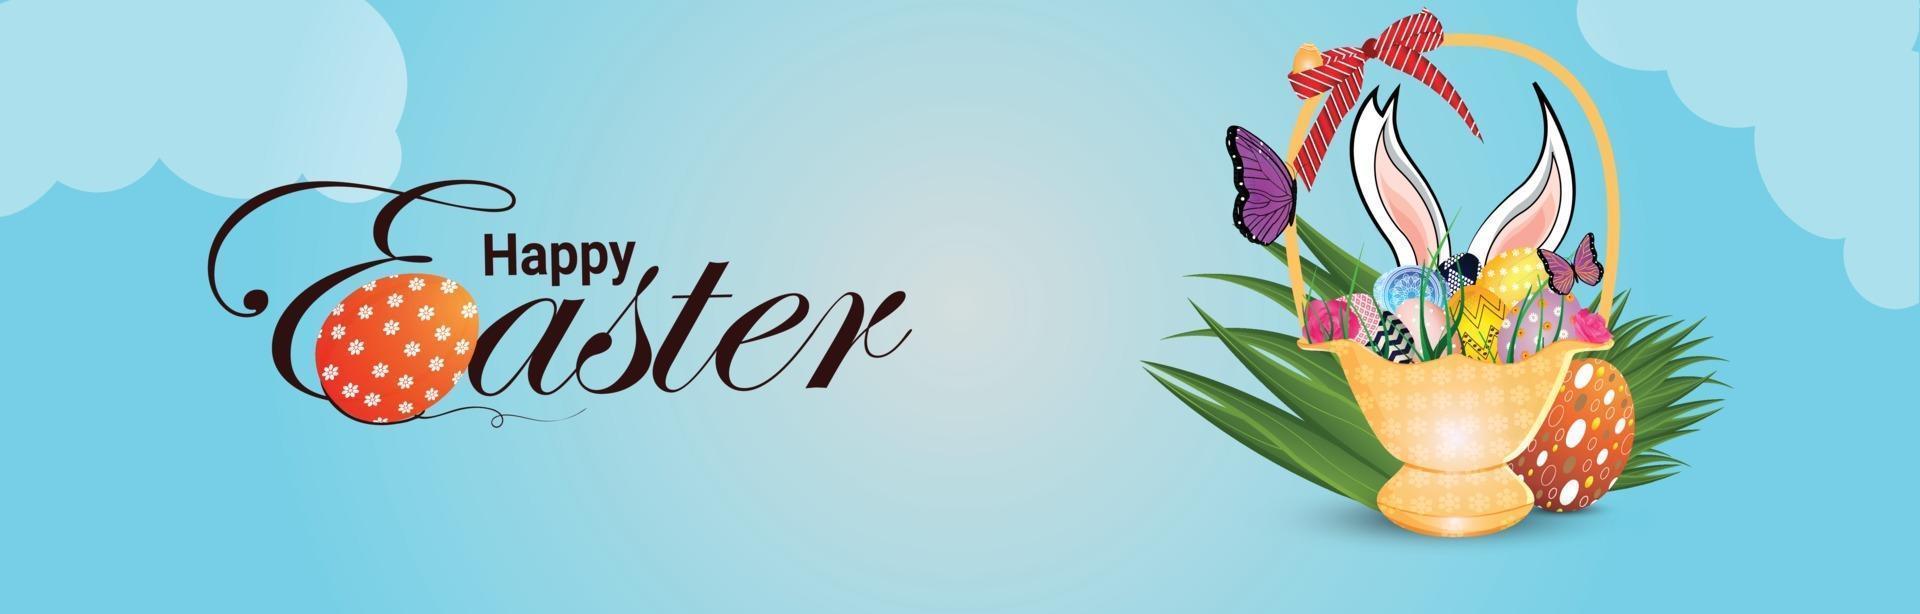 Happy easter day celebration banner with creative easter egg vector